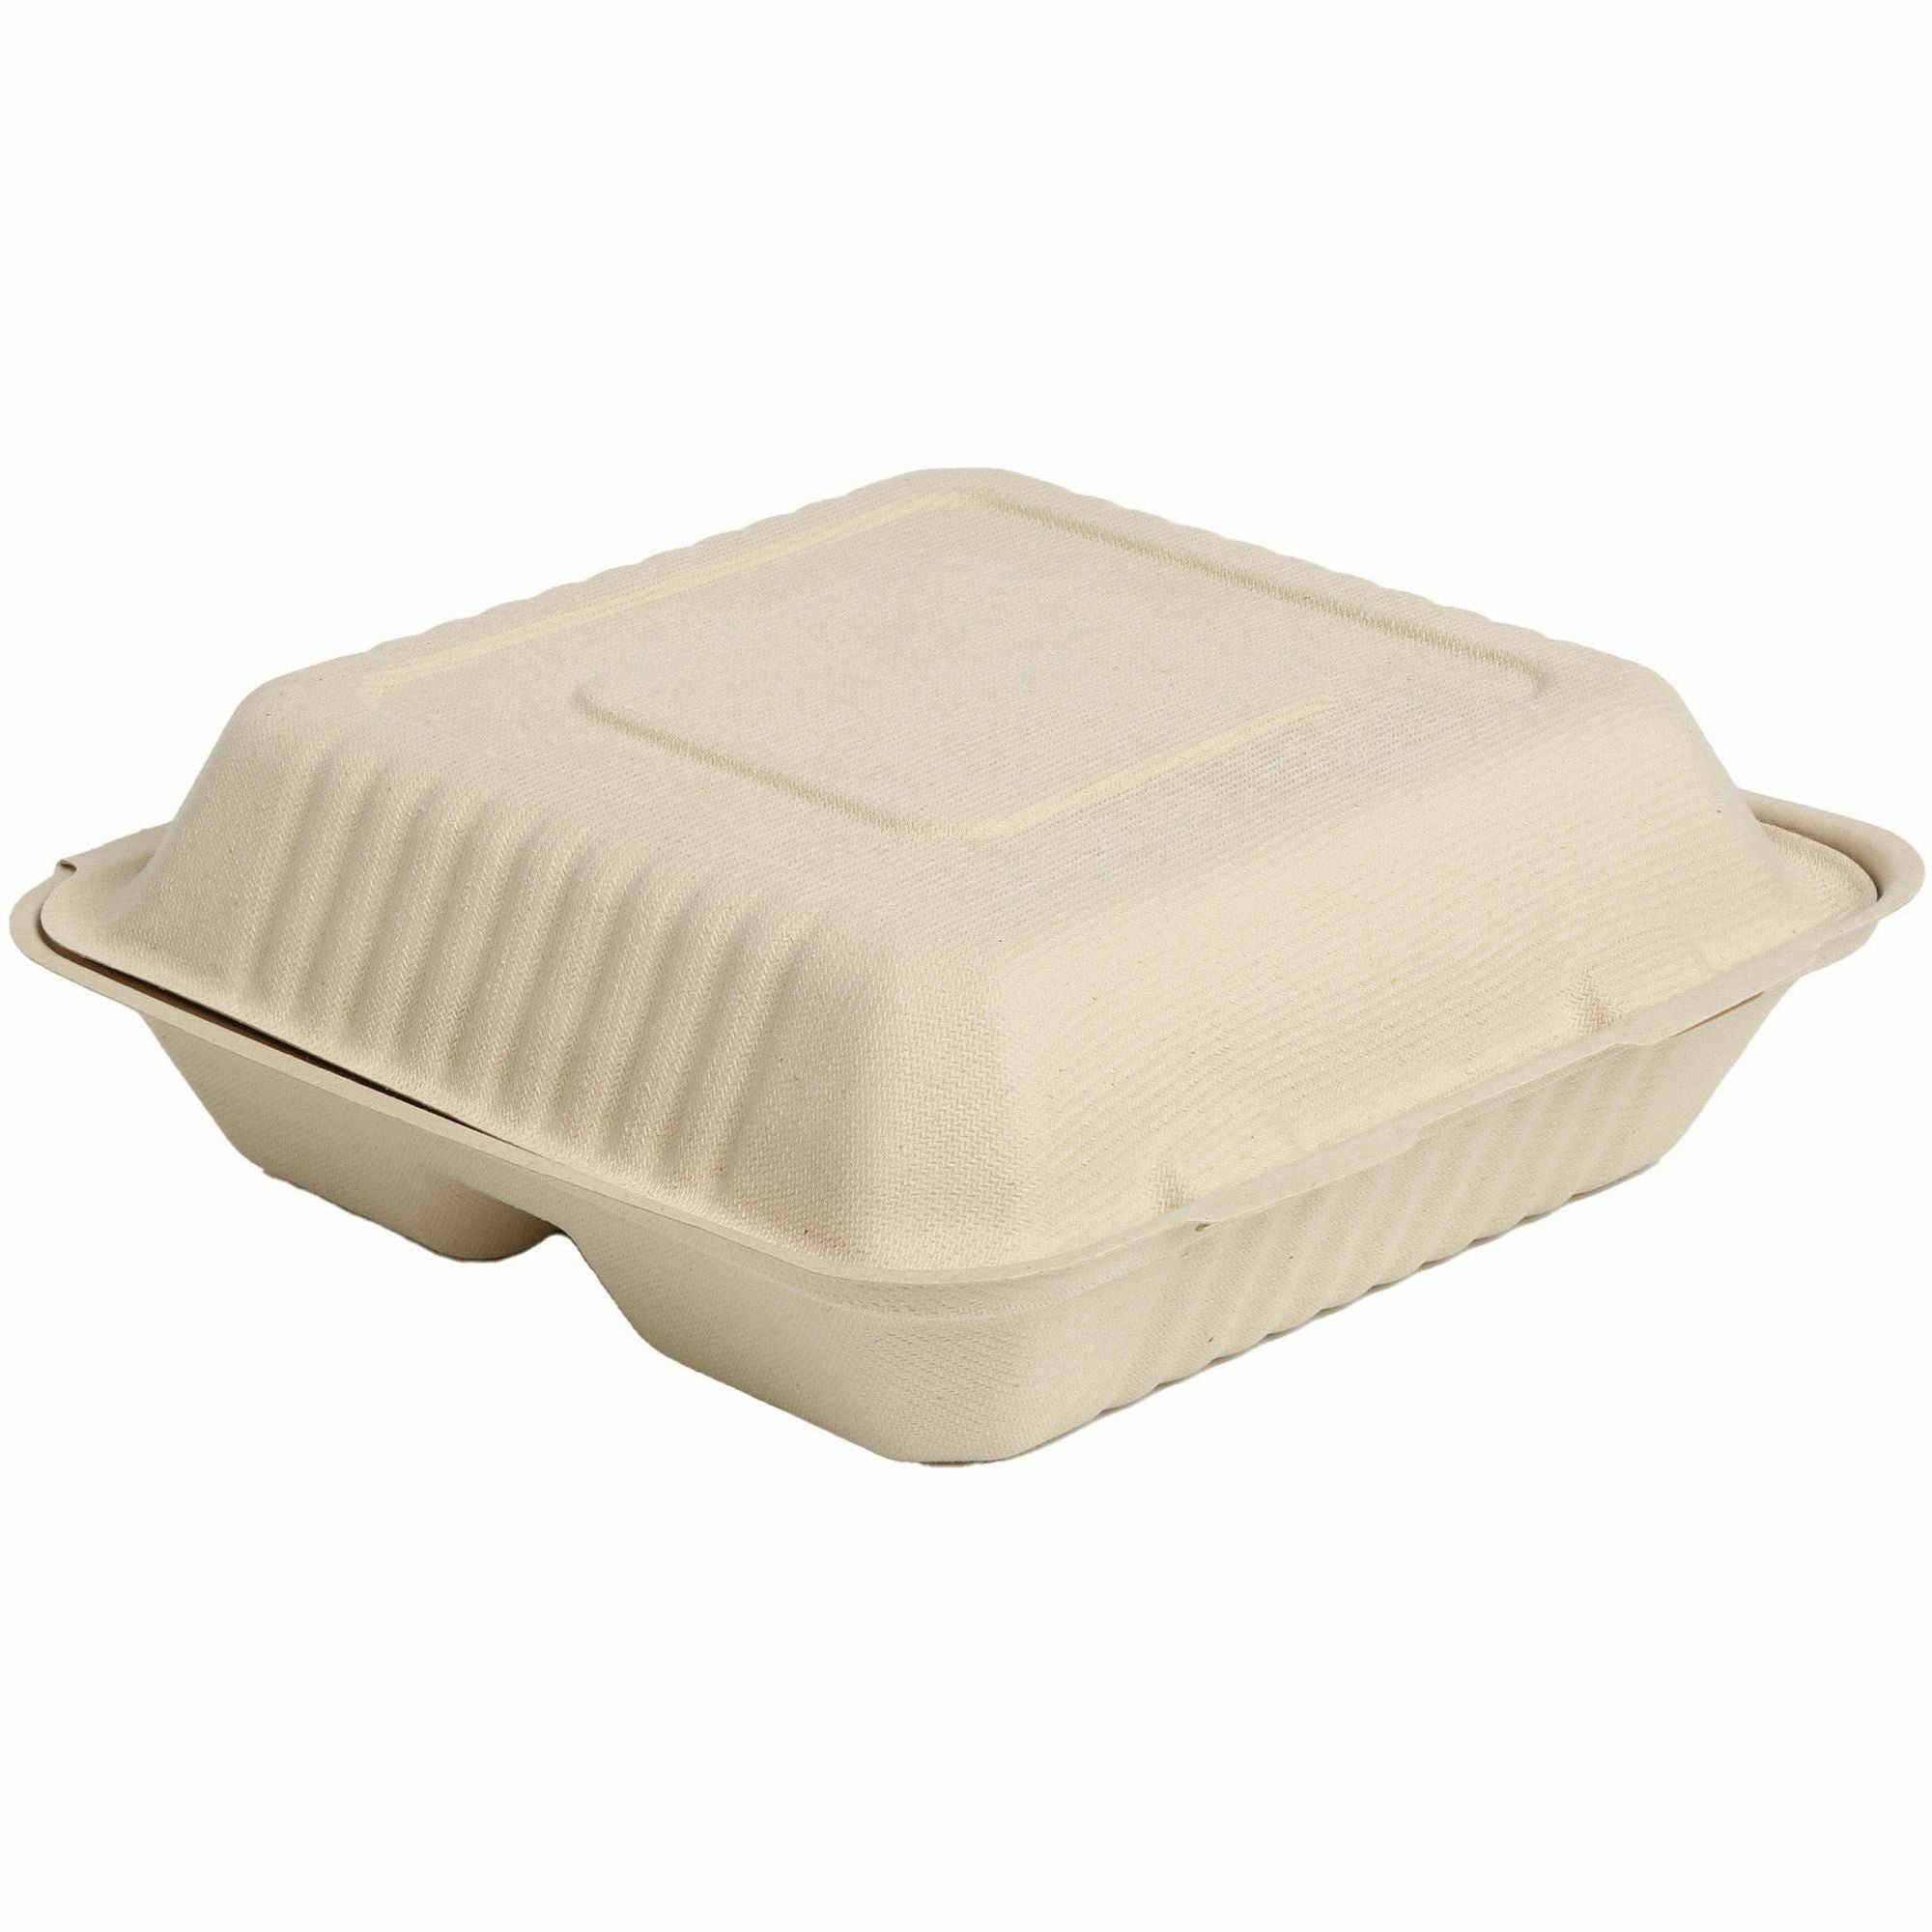 BluTable 39 oz 3-Compartment Portable Clamshell Containers - Food - Natural - Molded Fiber, Sugarcane Fiber Body - 200 / Carton - 2